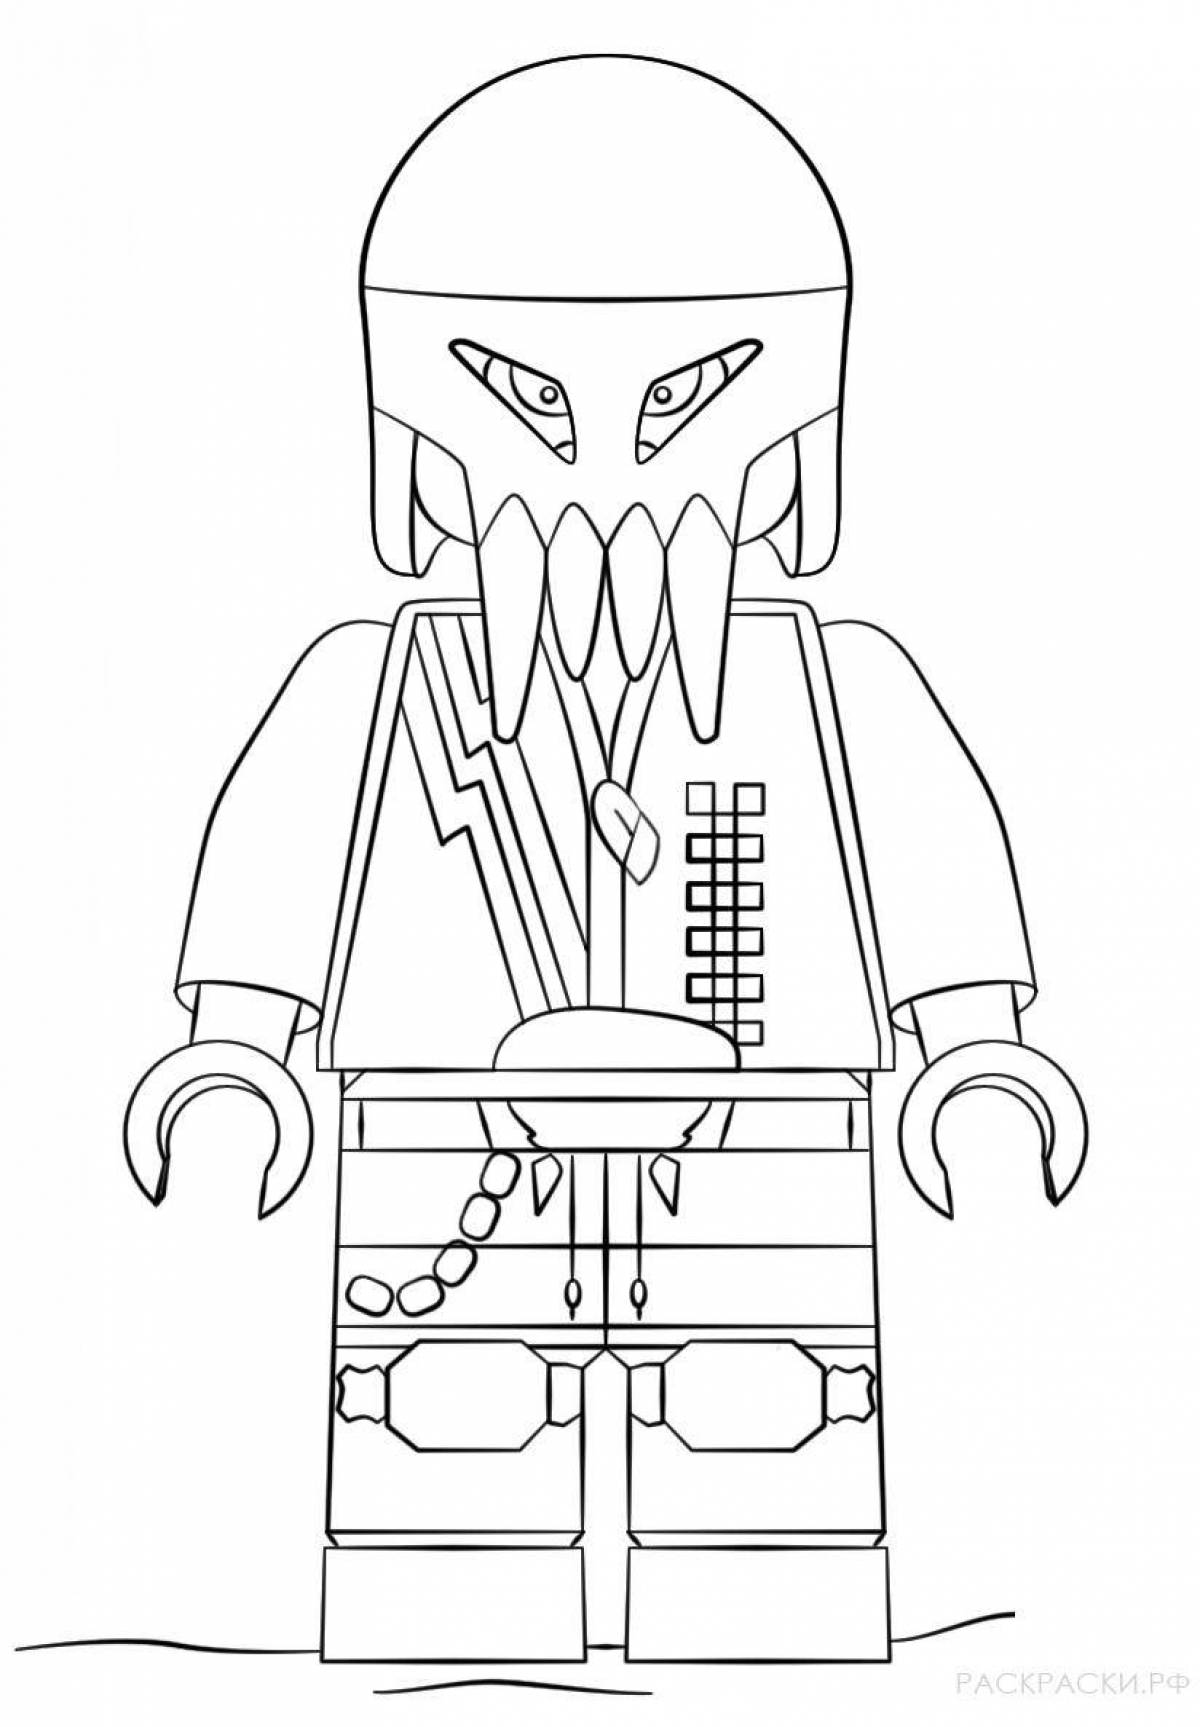 Colorful lego zombie coloring page